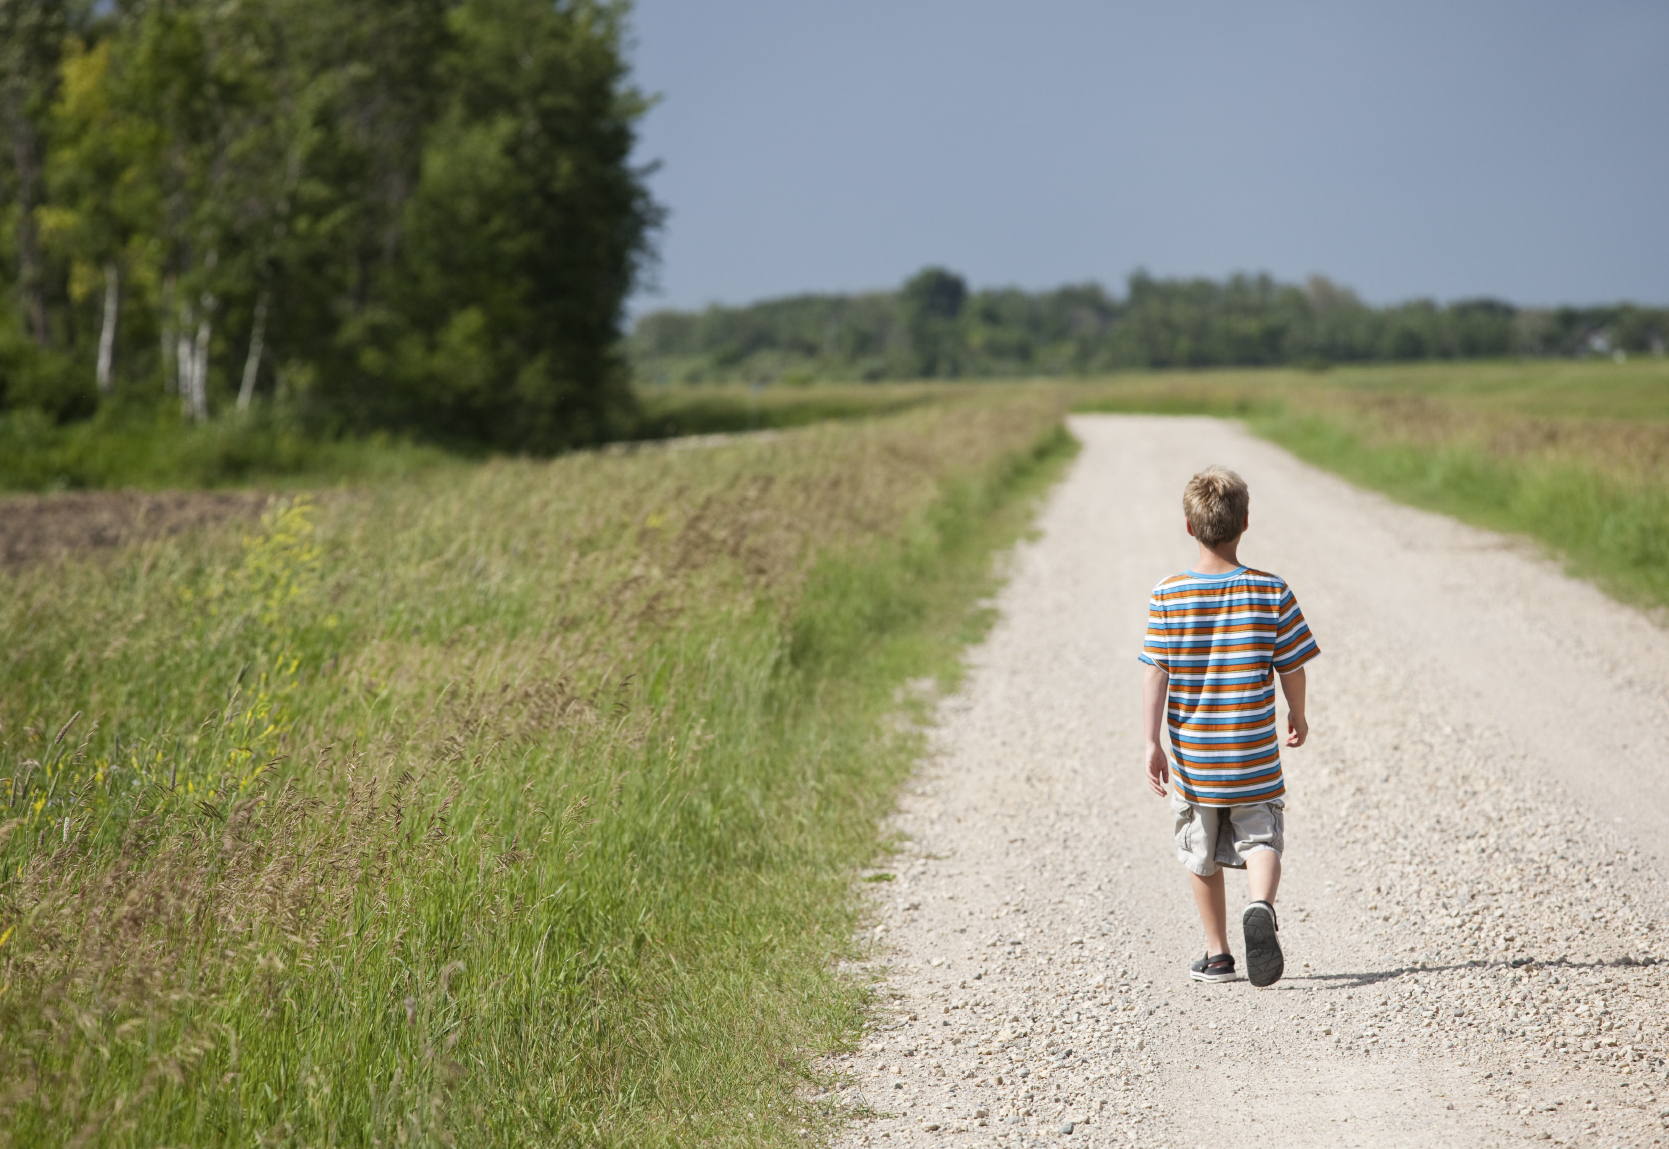 A young boy walks alone down a gravel road in the countryside.